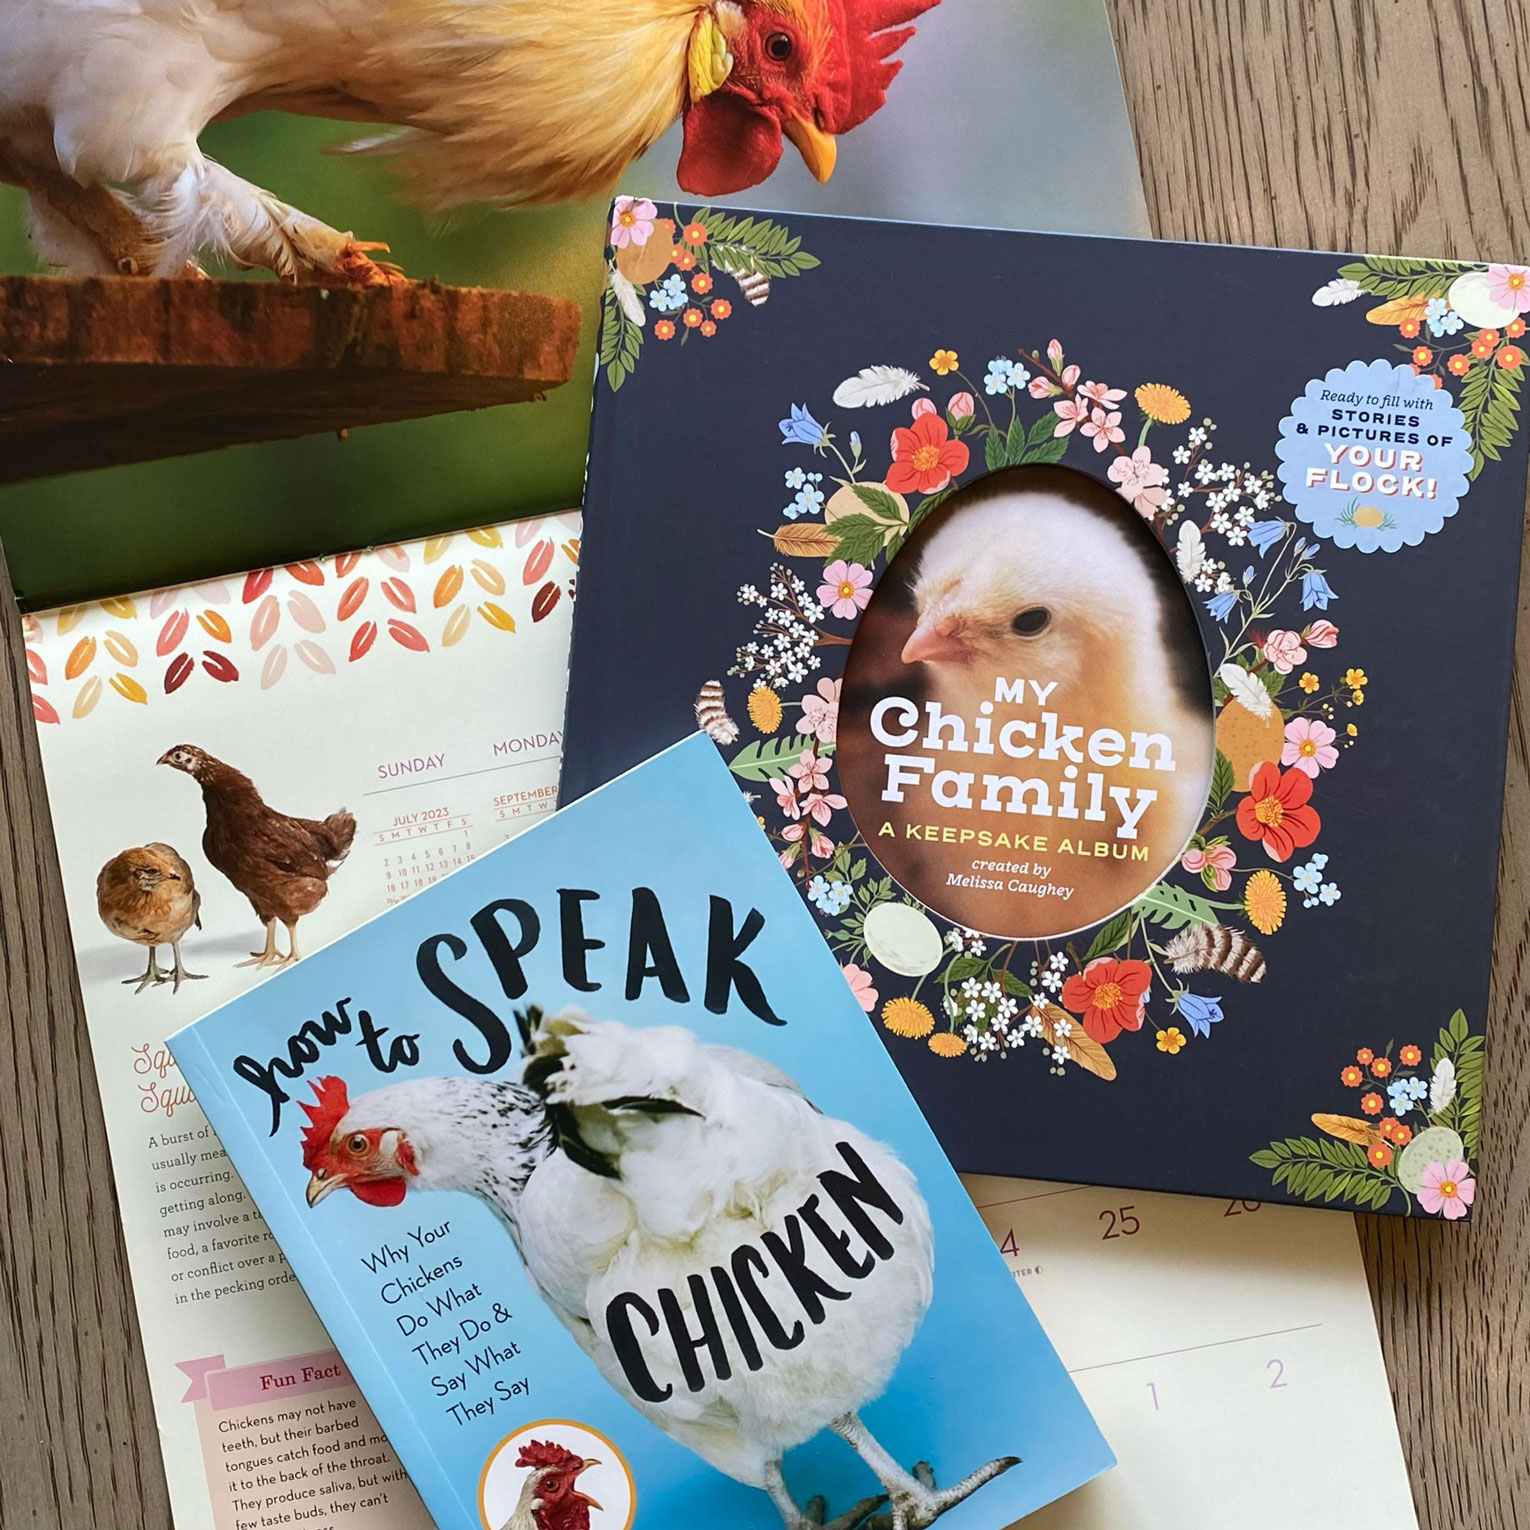 Photo of My Chicken Family book, How to Speak Chicken book, and wall calendar.